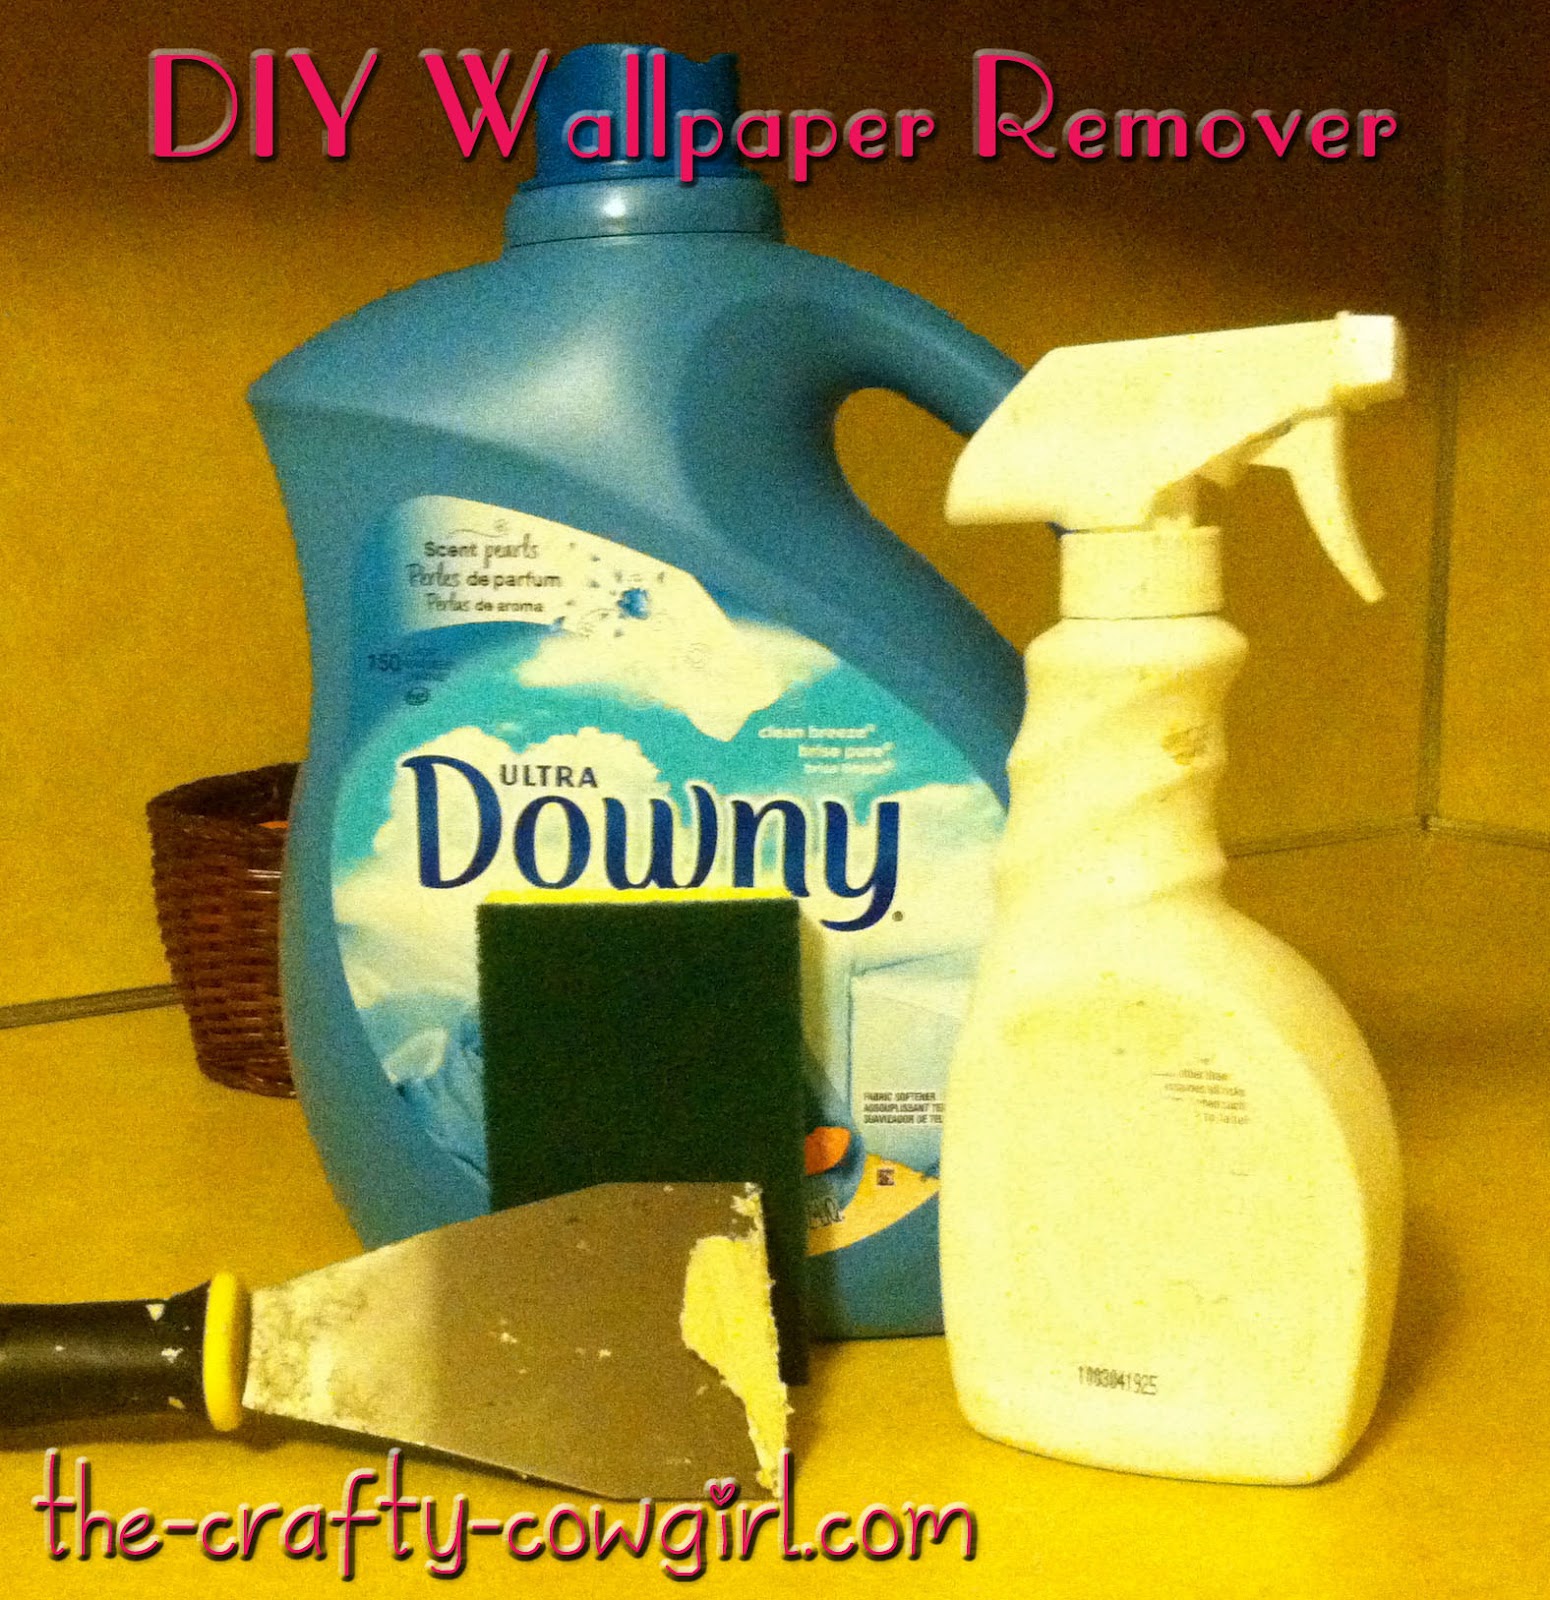 Free download fabric softener to about